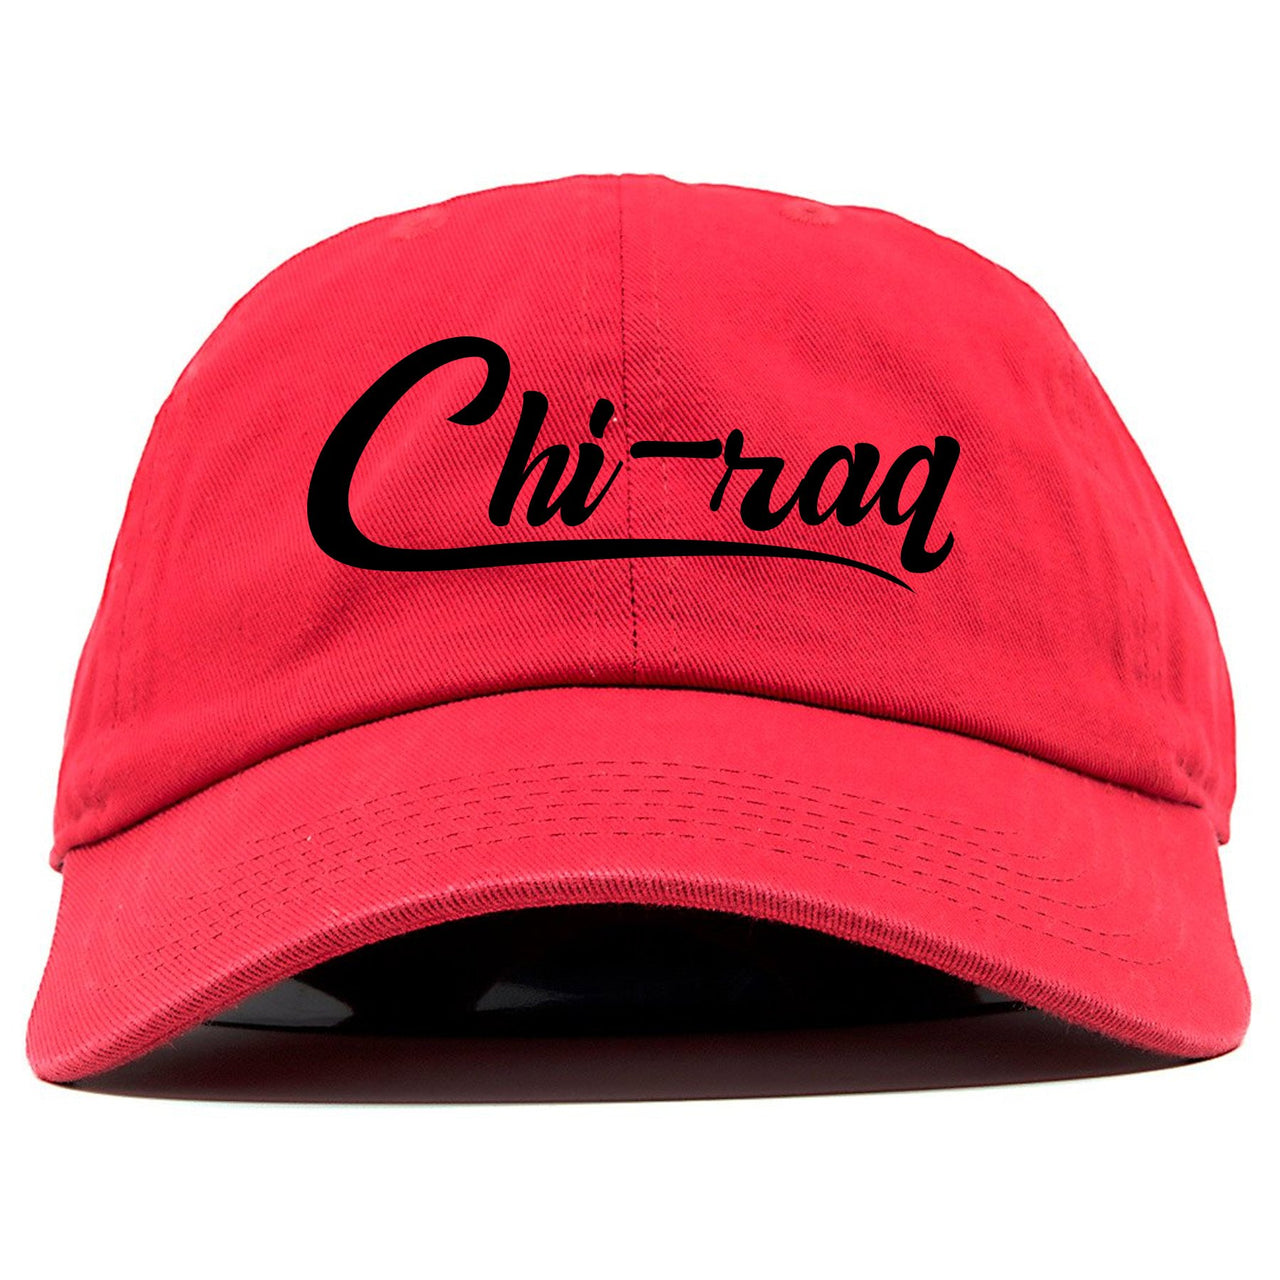 Reflections of a Champion 7s Dad Hat | Chiraq Script, Red